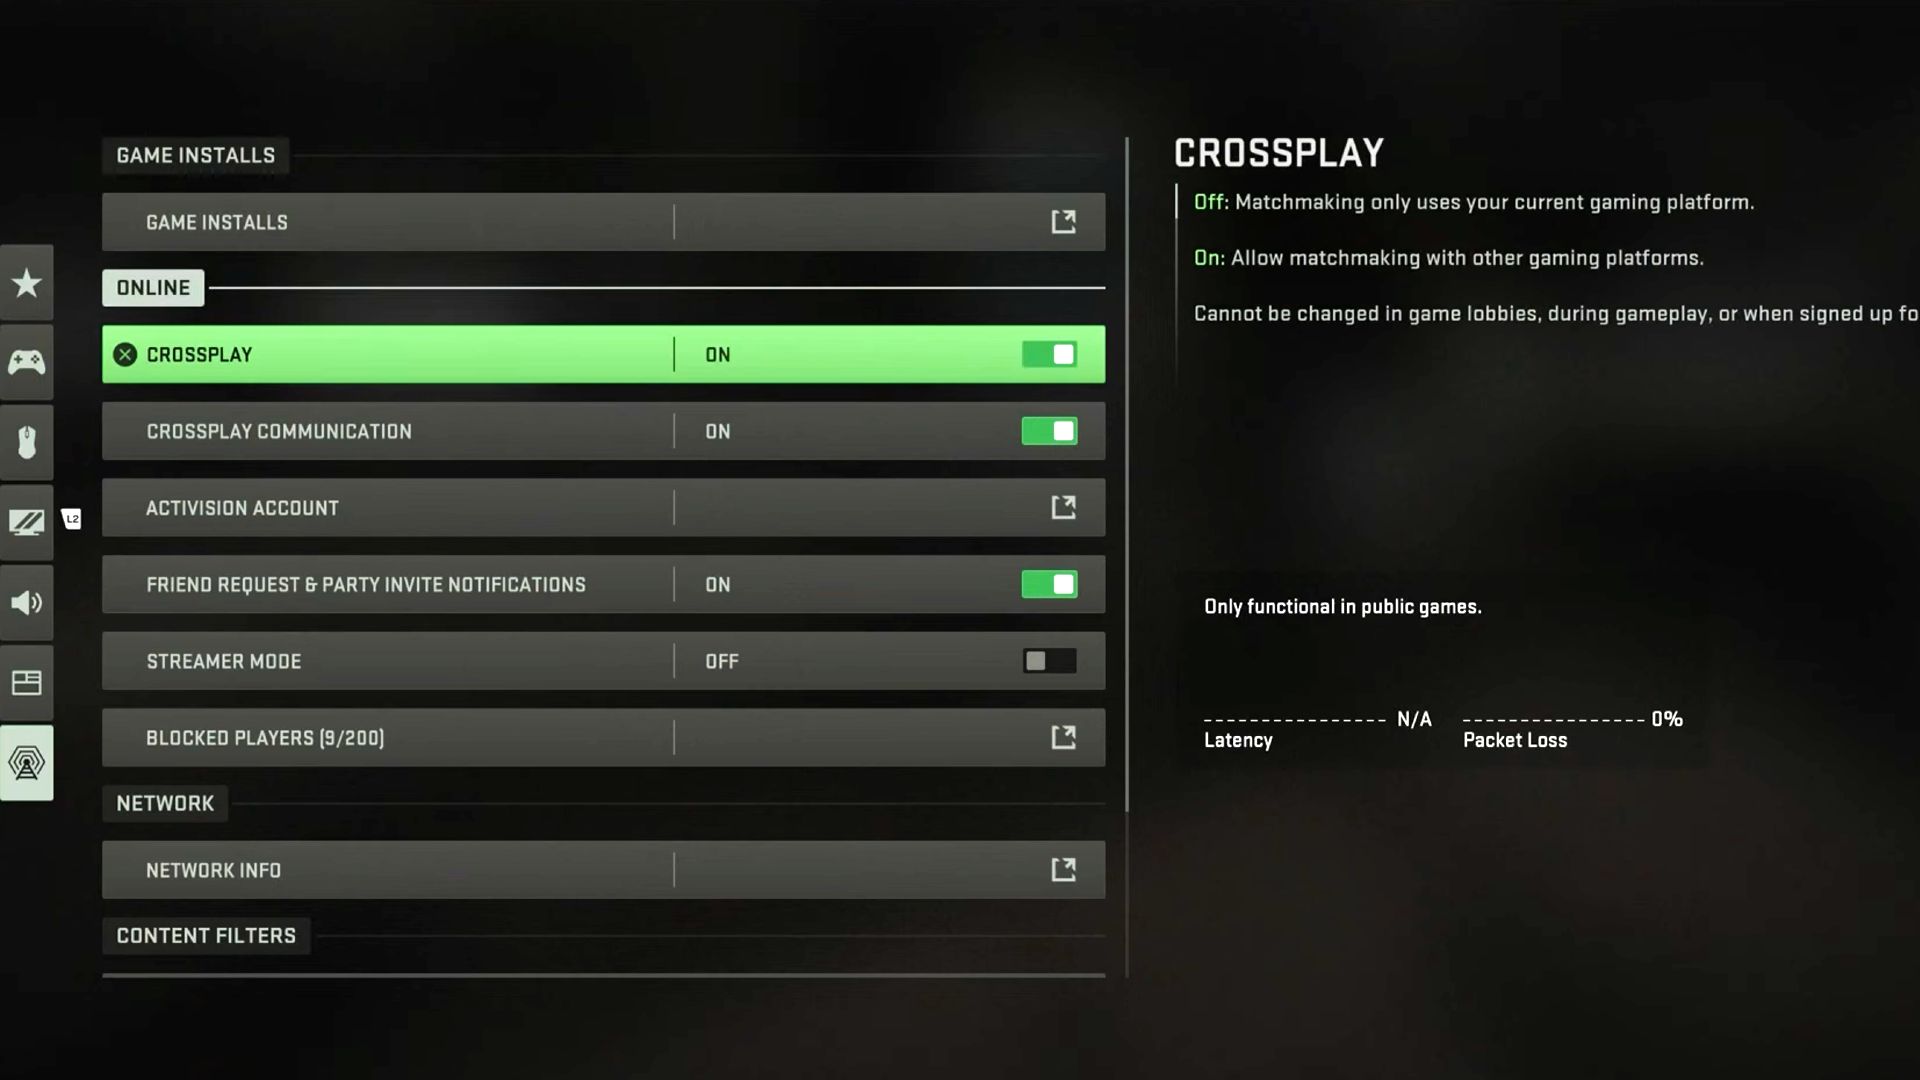 Call of Duty crossplay icons explained